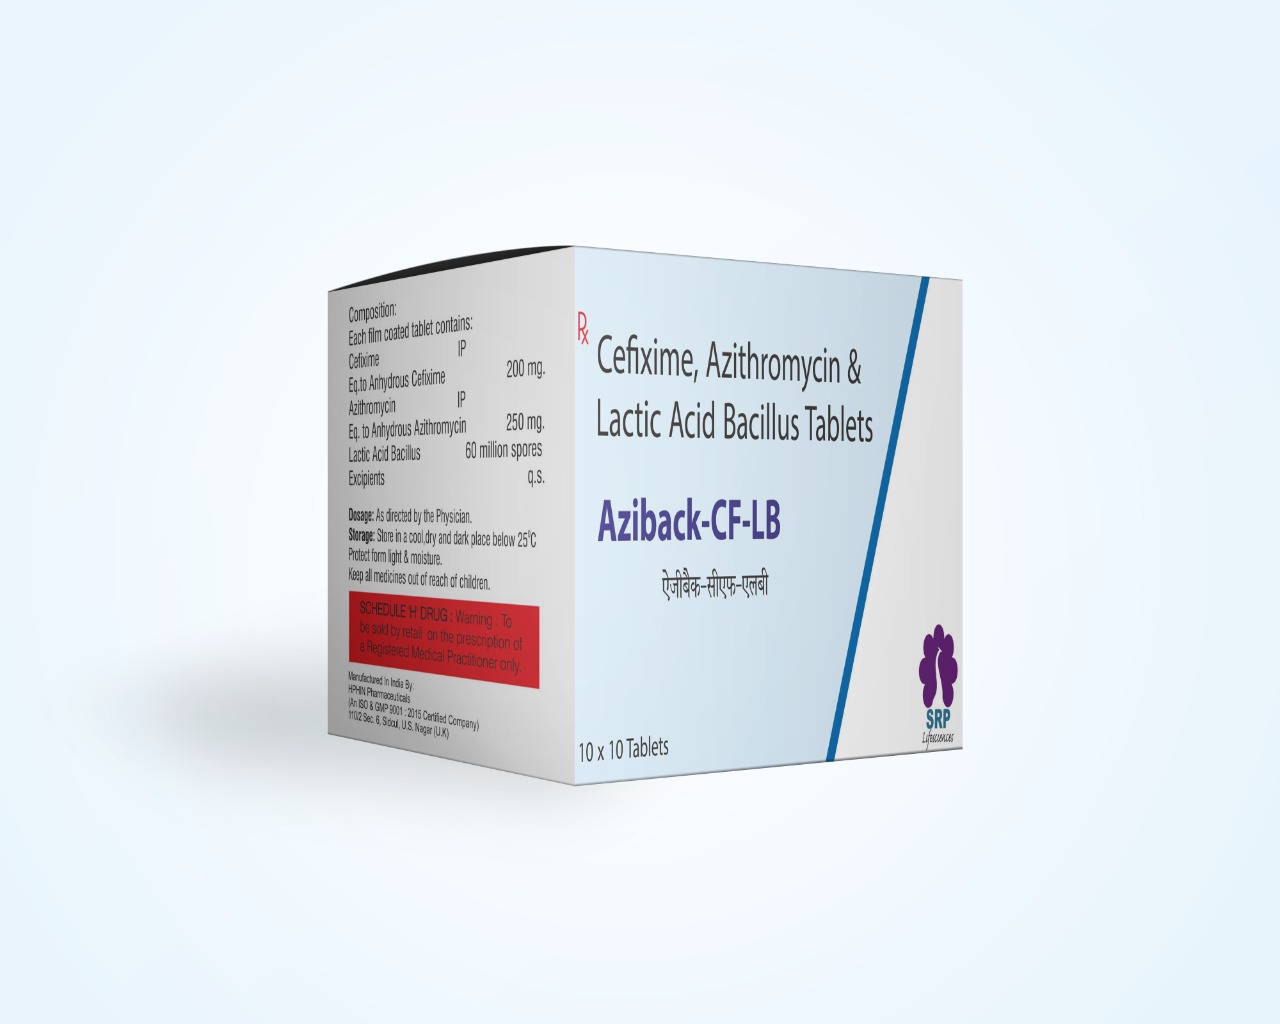 Product Name: Aziback cf lb, Compositions of Aziback cf lb are cefixime,azithromycin,lactic acd bacillus tablets - Cynak Healthcare